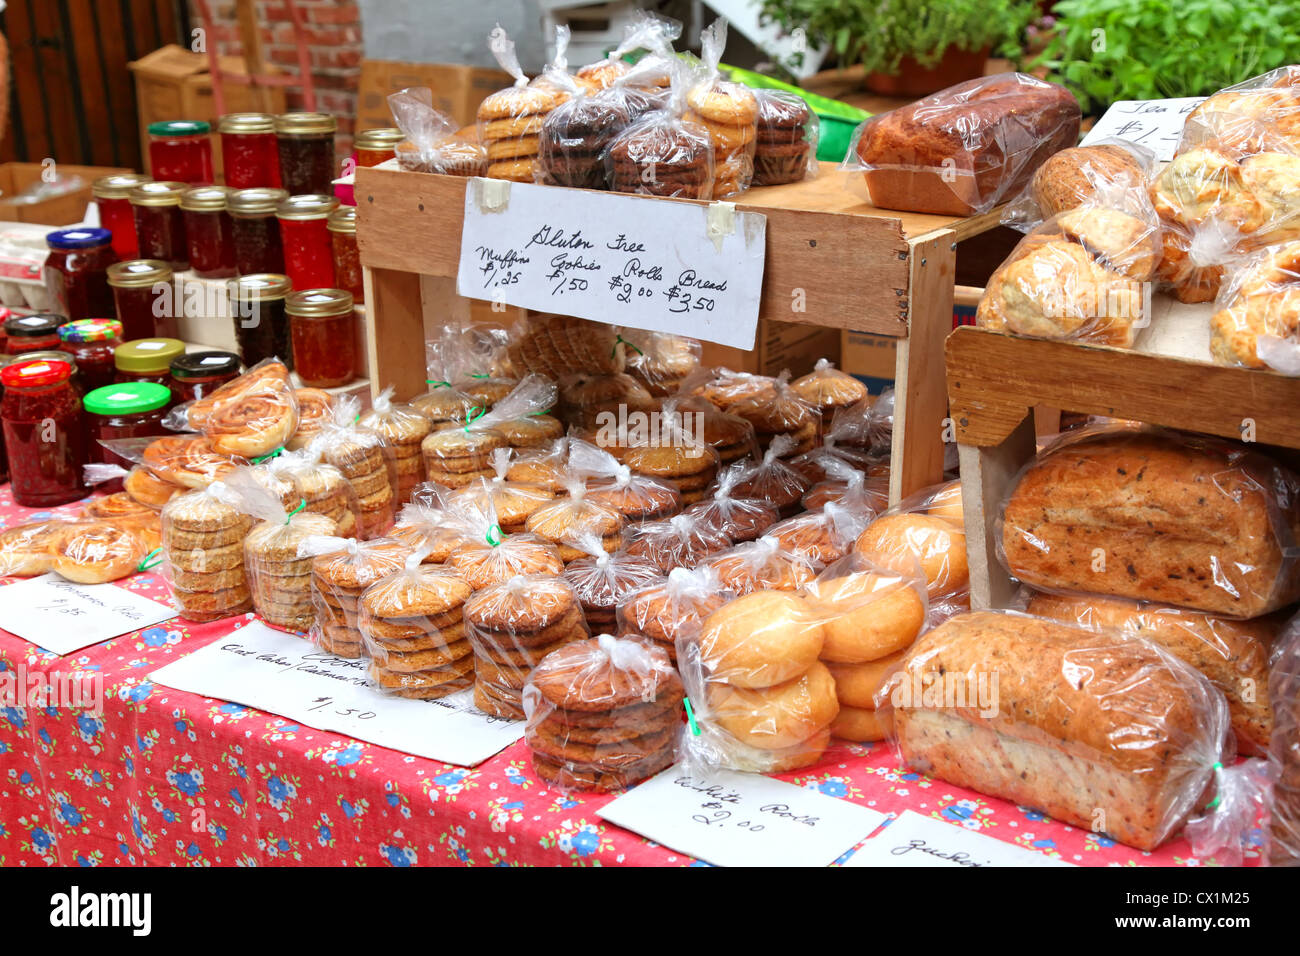 Baked goods and homemade preserves and jams at a farmer's market. Stock Photo